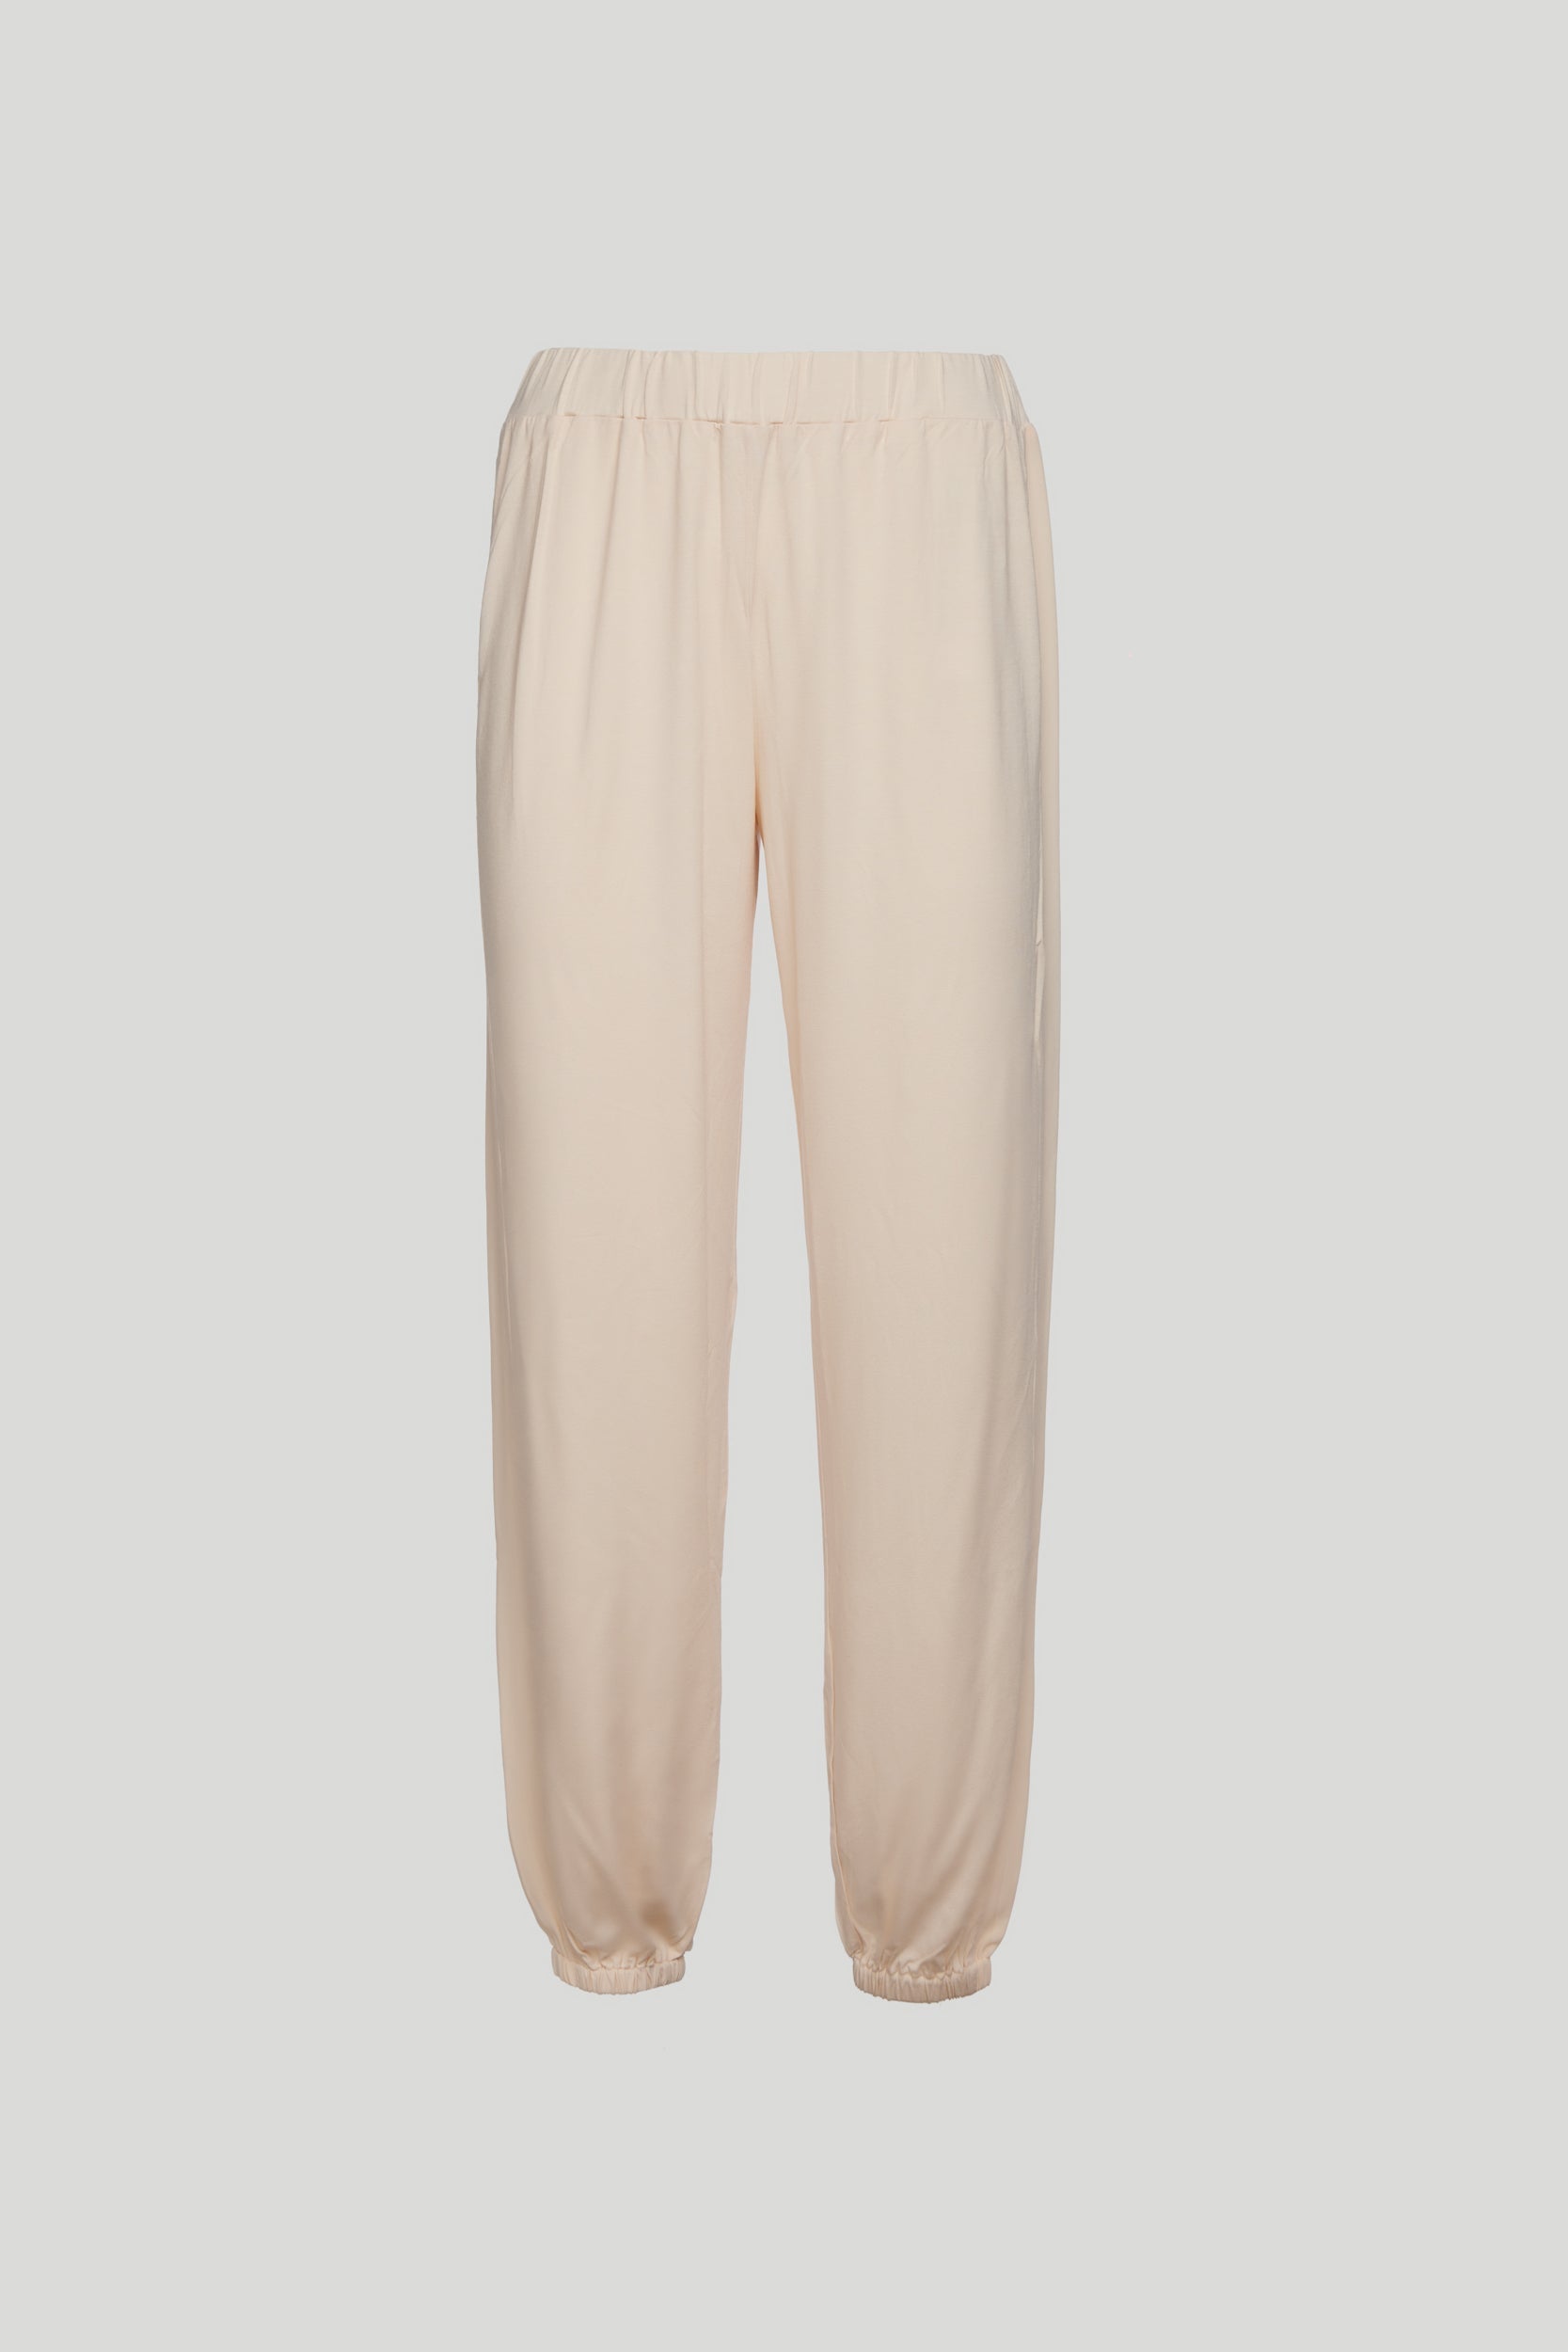 TWINSET Ivory Jogger Trousers